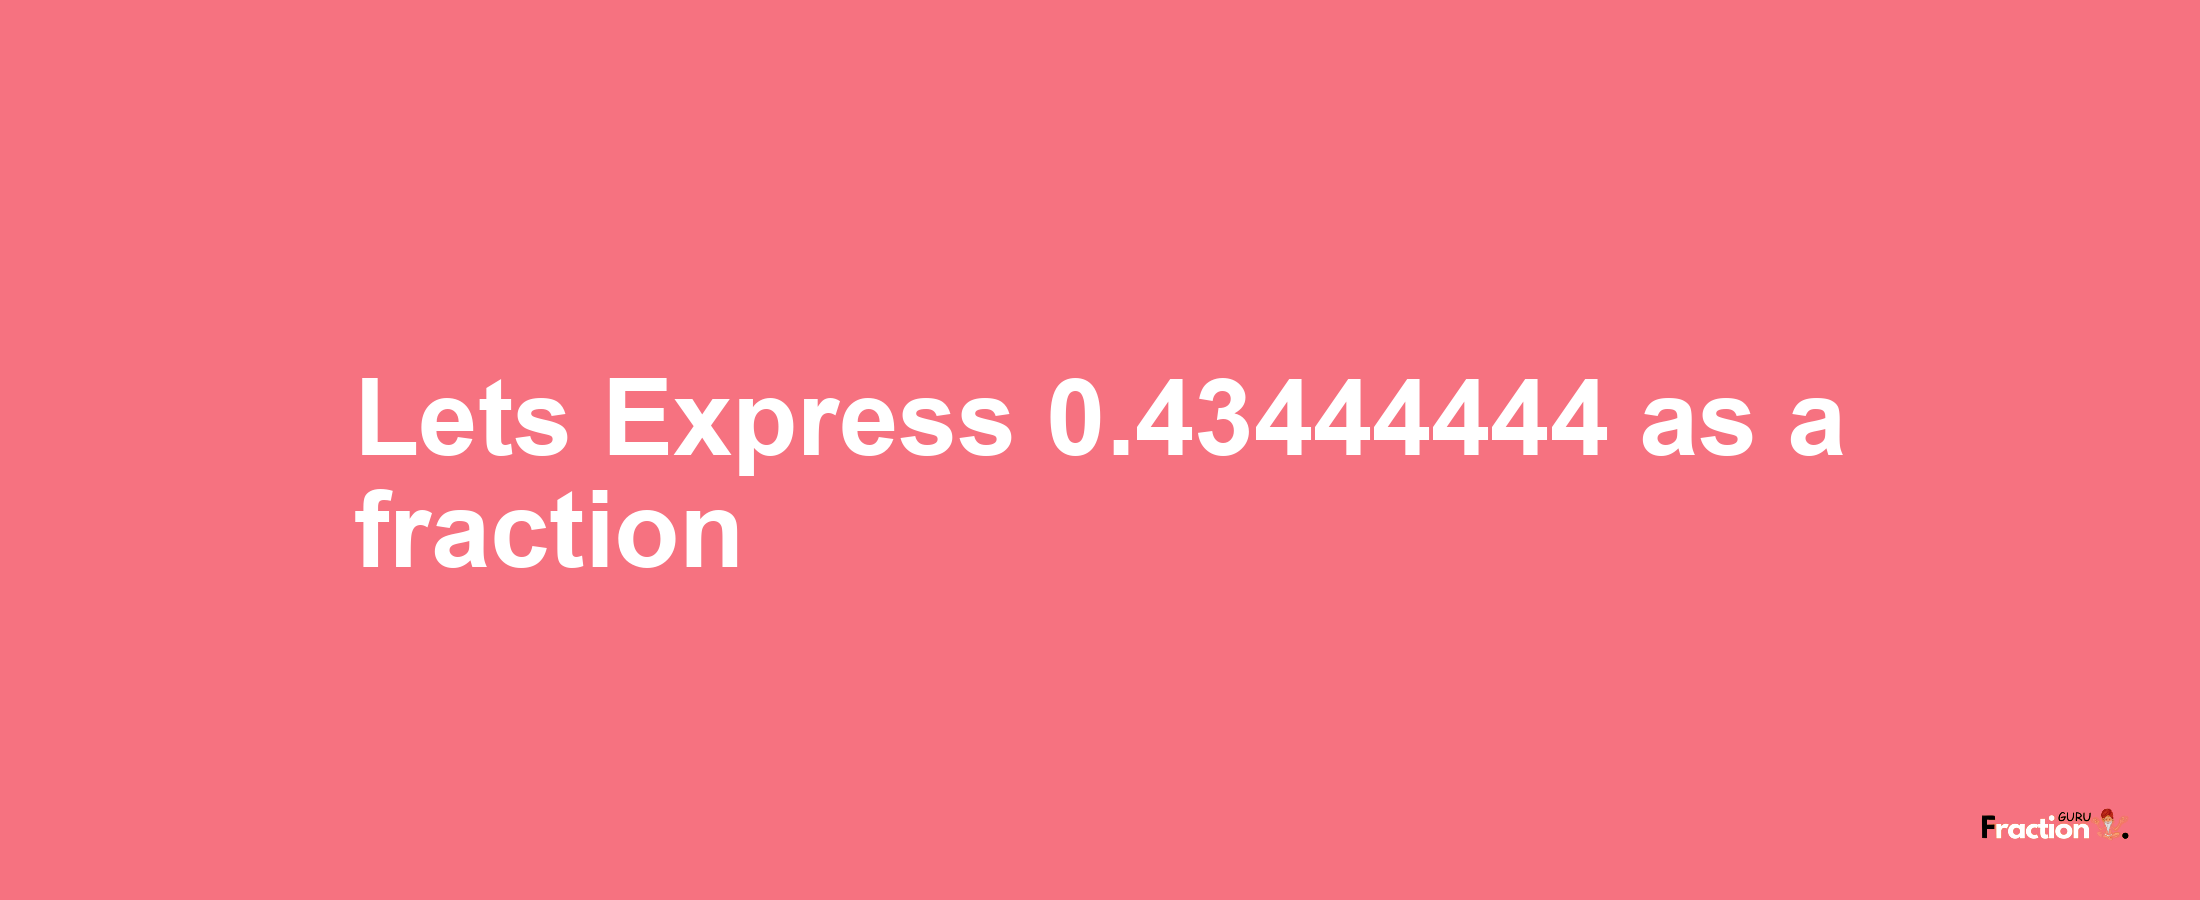 Lets Express 0.43444444 as afraction